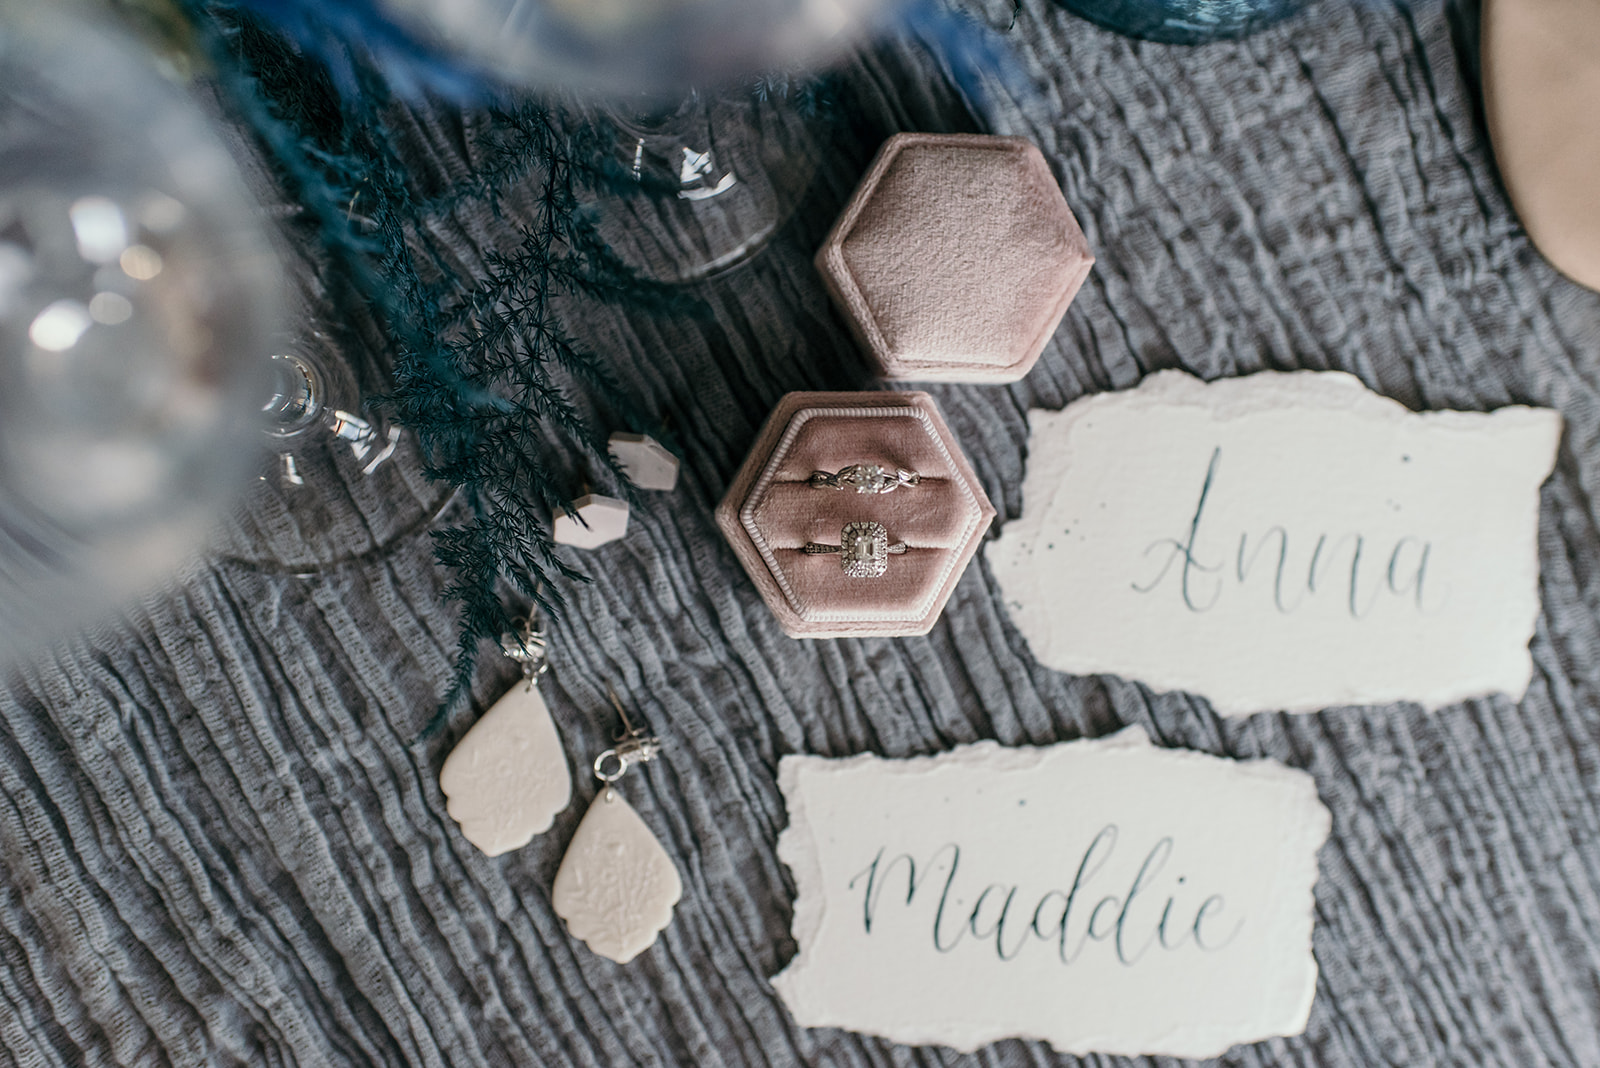 Engagement rings, dusty rose ring box, clay earrings and calligraphy styled place cards